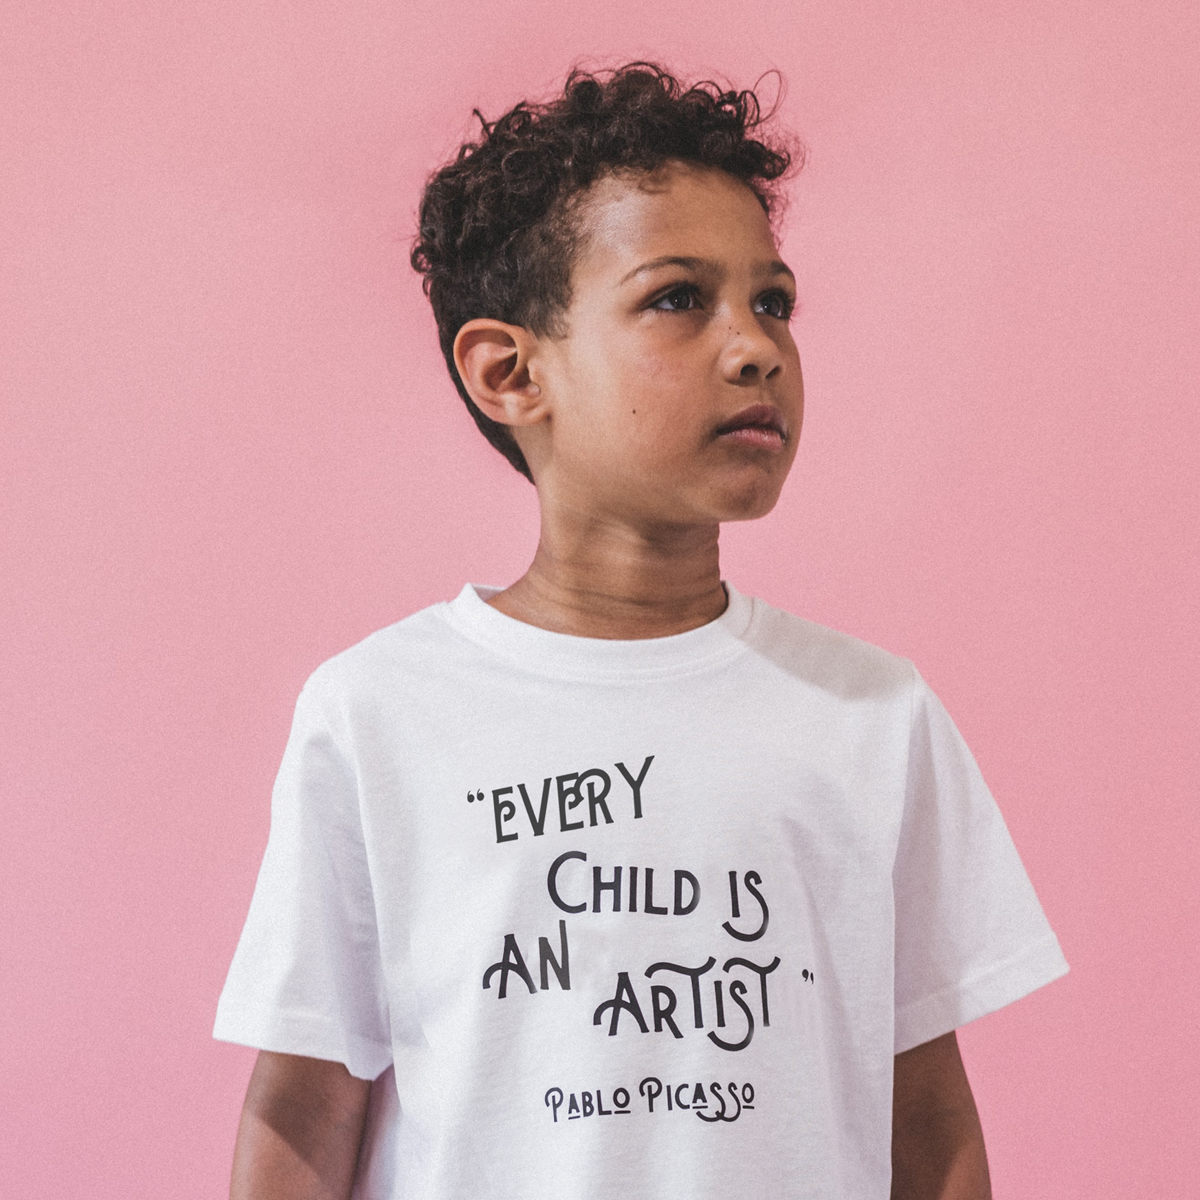 "EVERY CHILD IS AN ARTIST" PICASSO QUOTE Organic T-shirt - Black On White